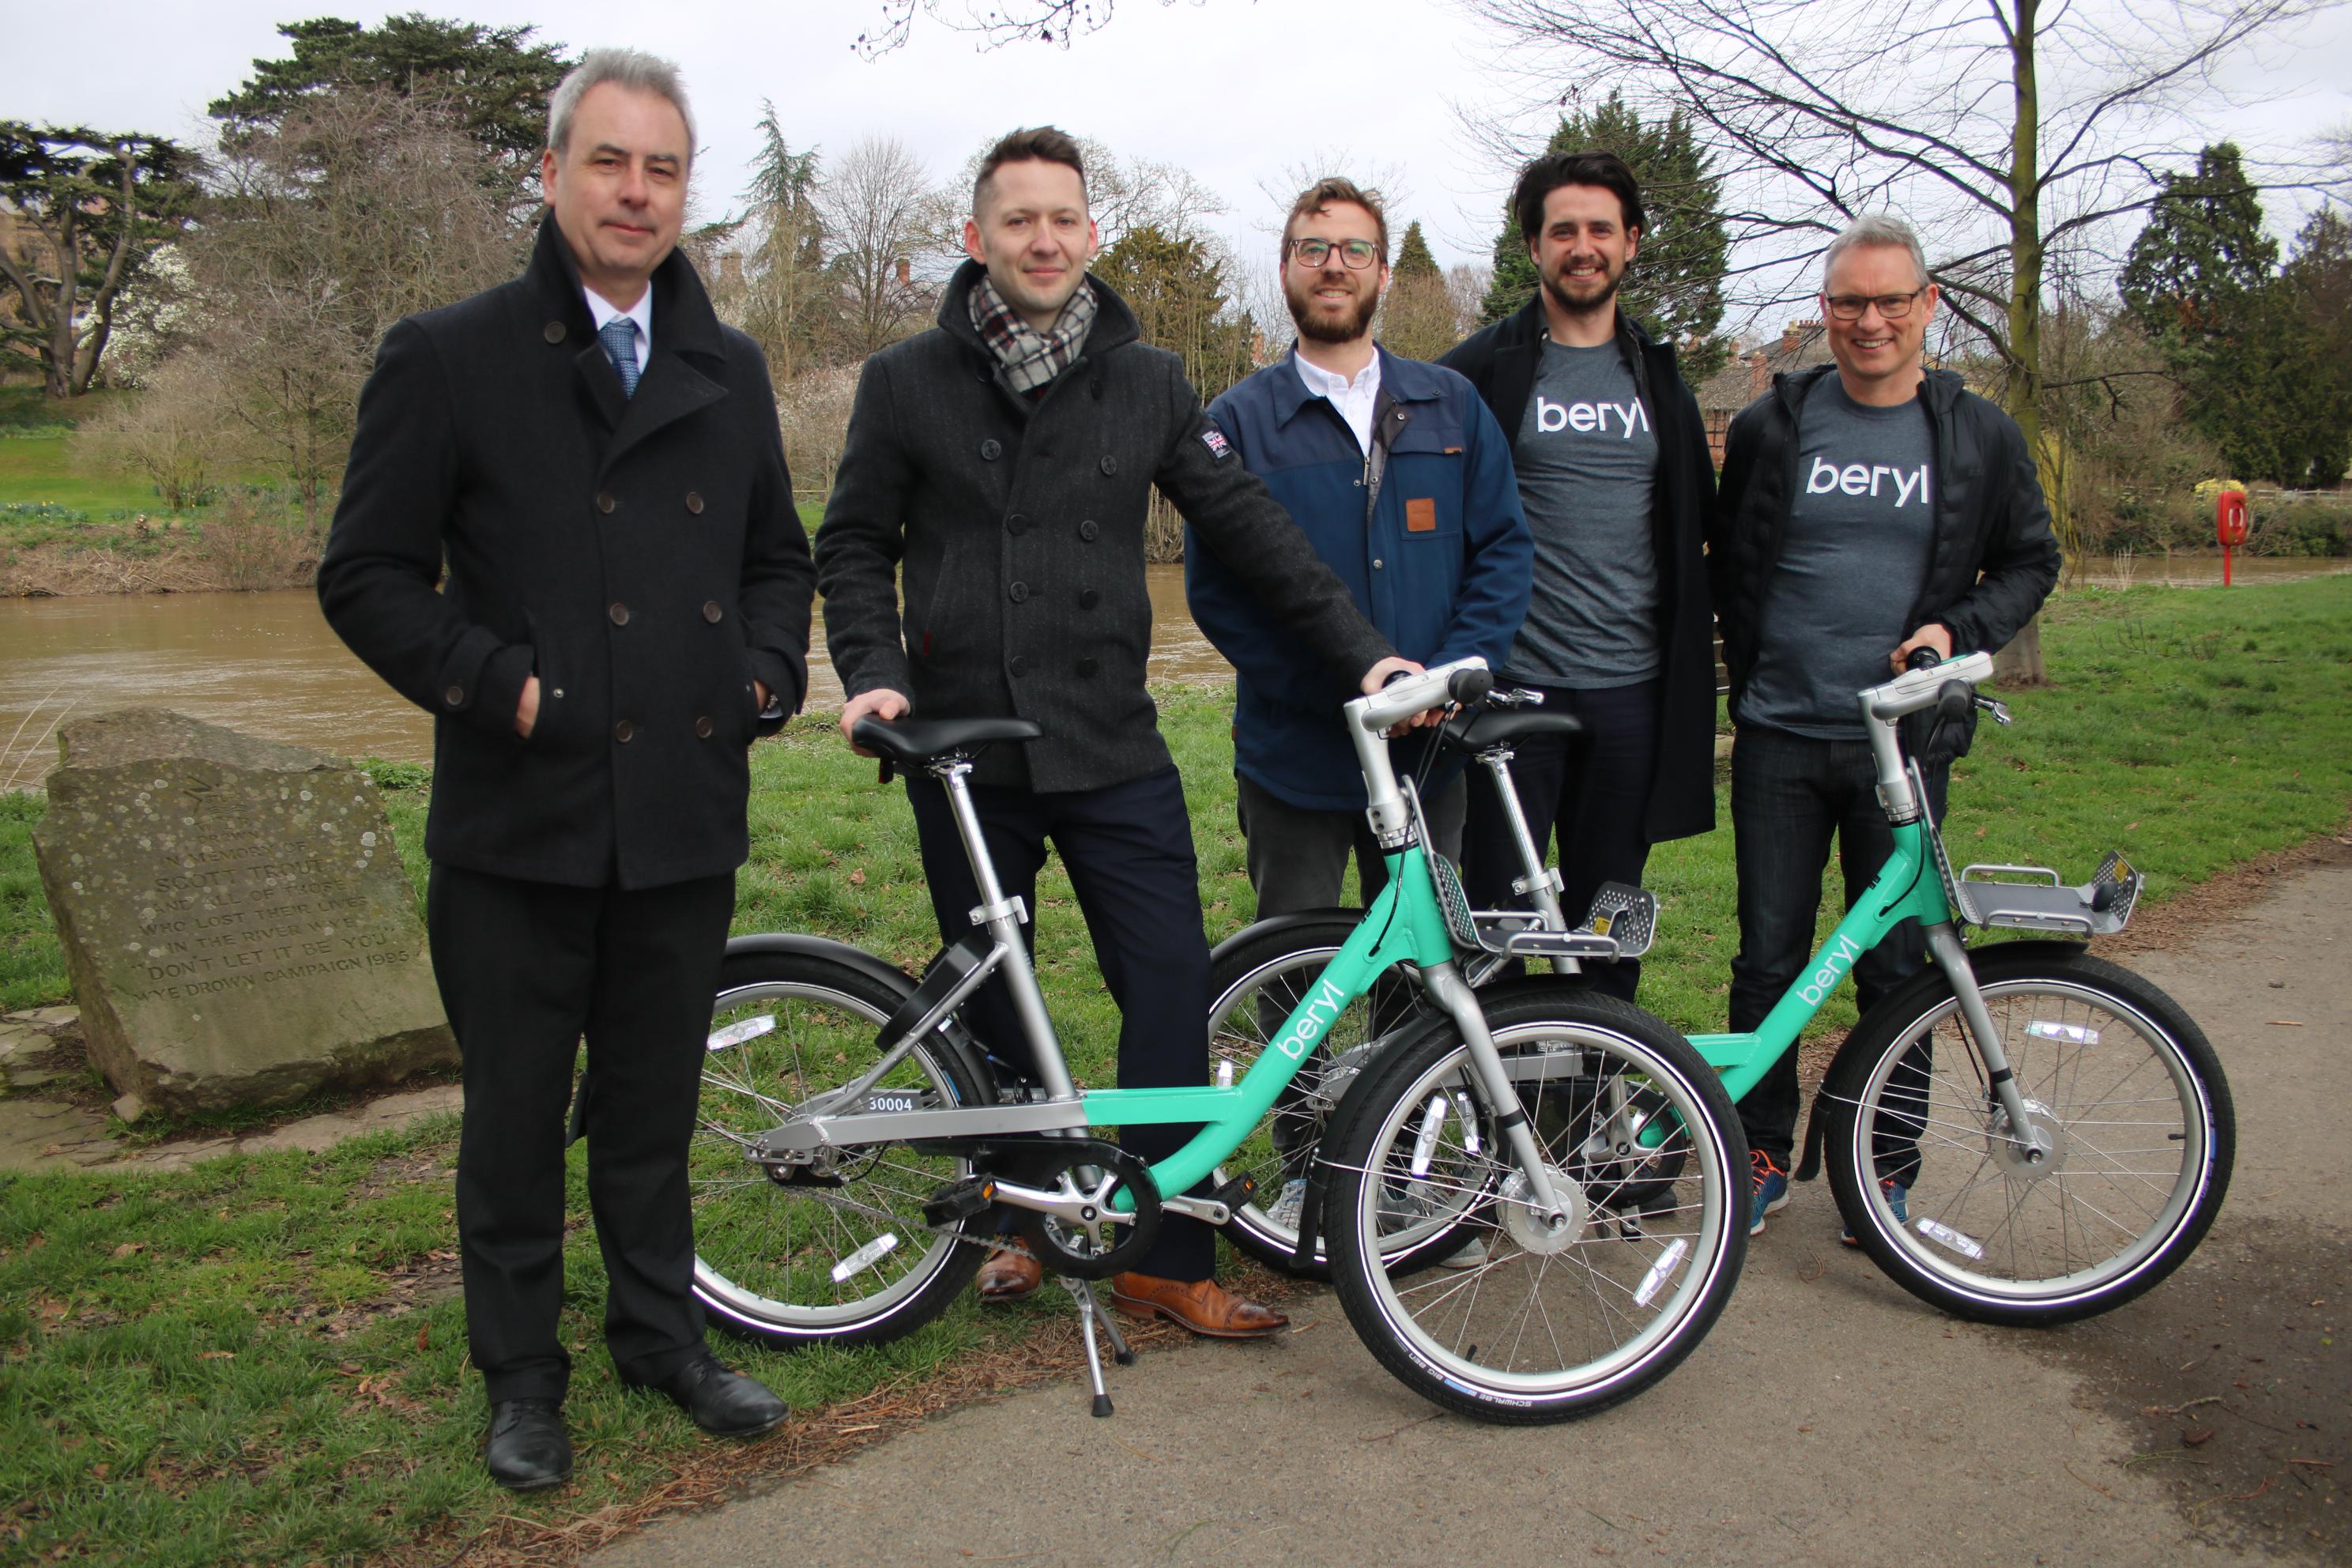 NEWS | New cycling initiative hopes to get more people cycling in Hereford